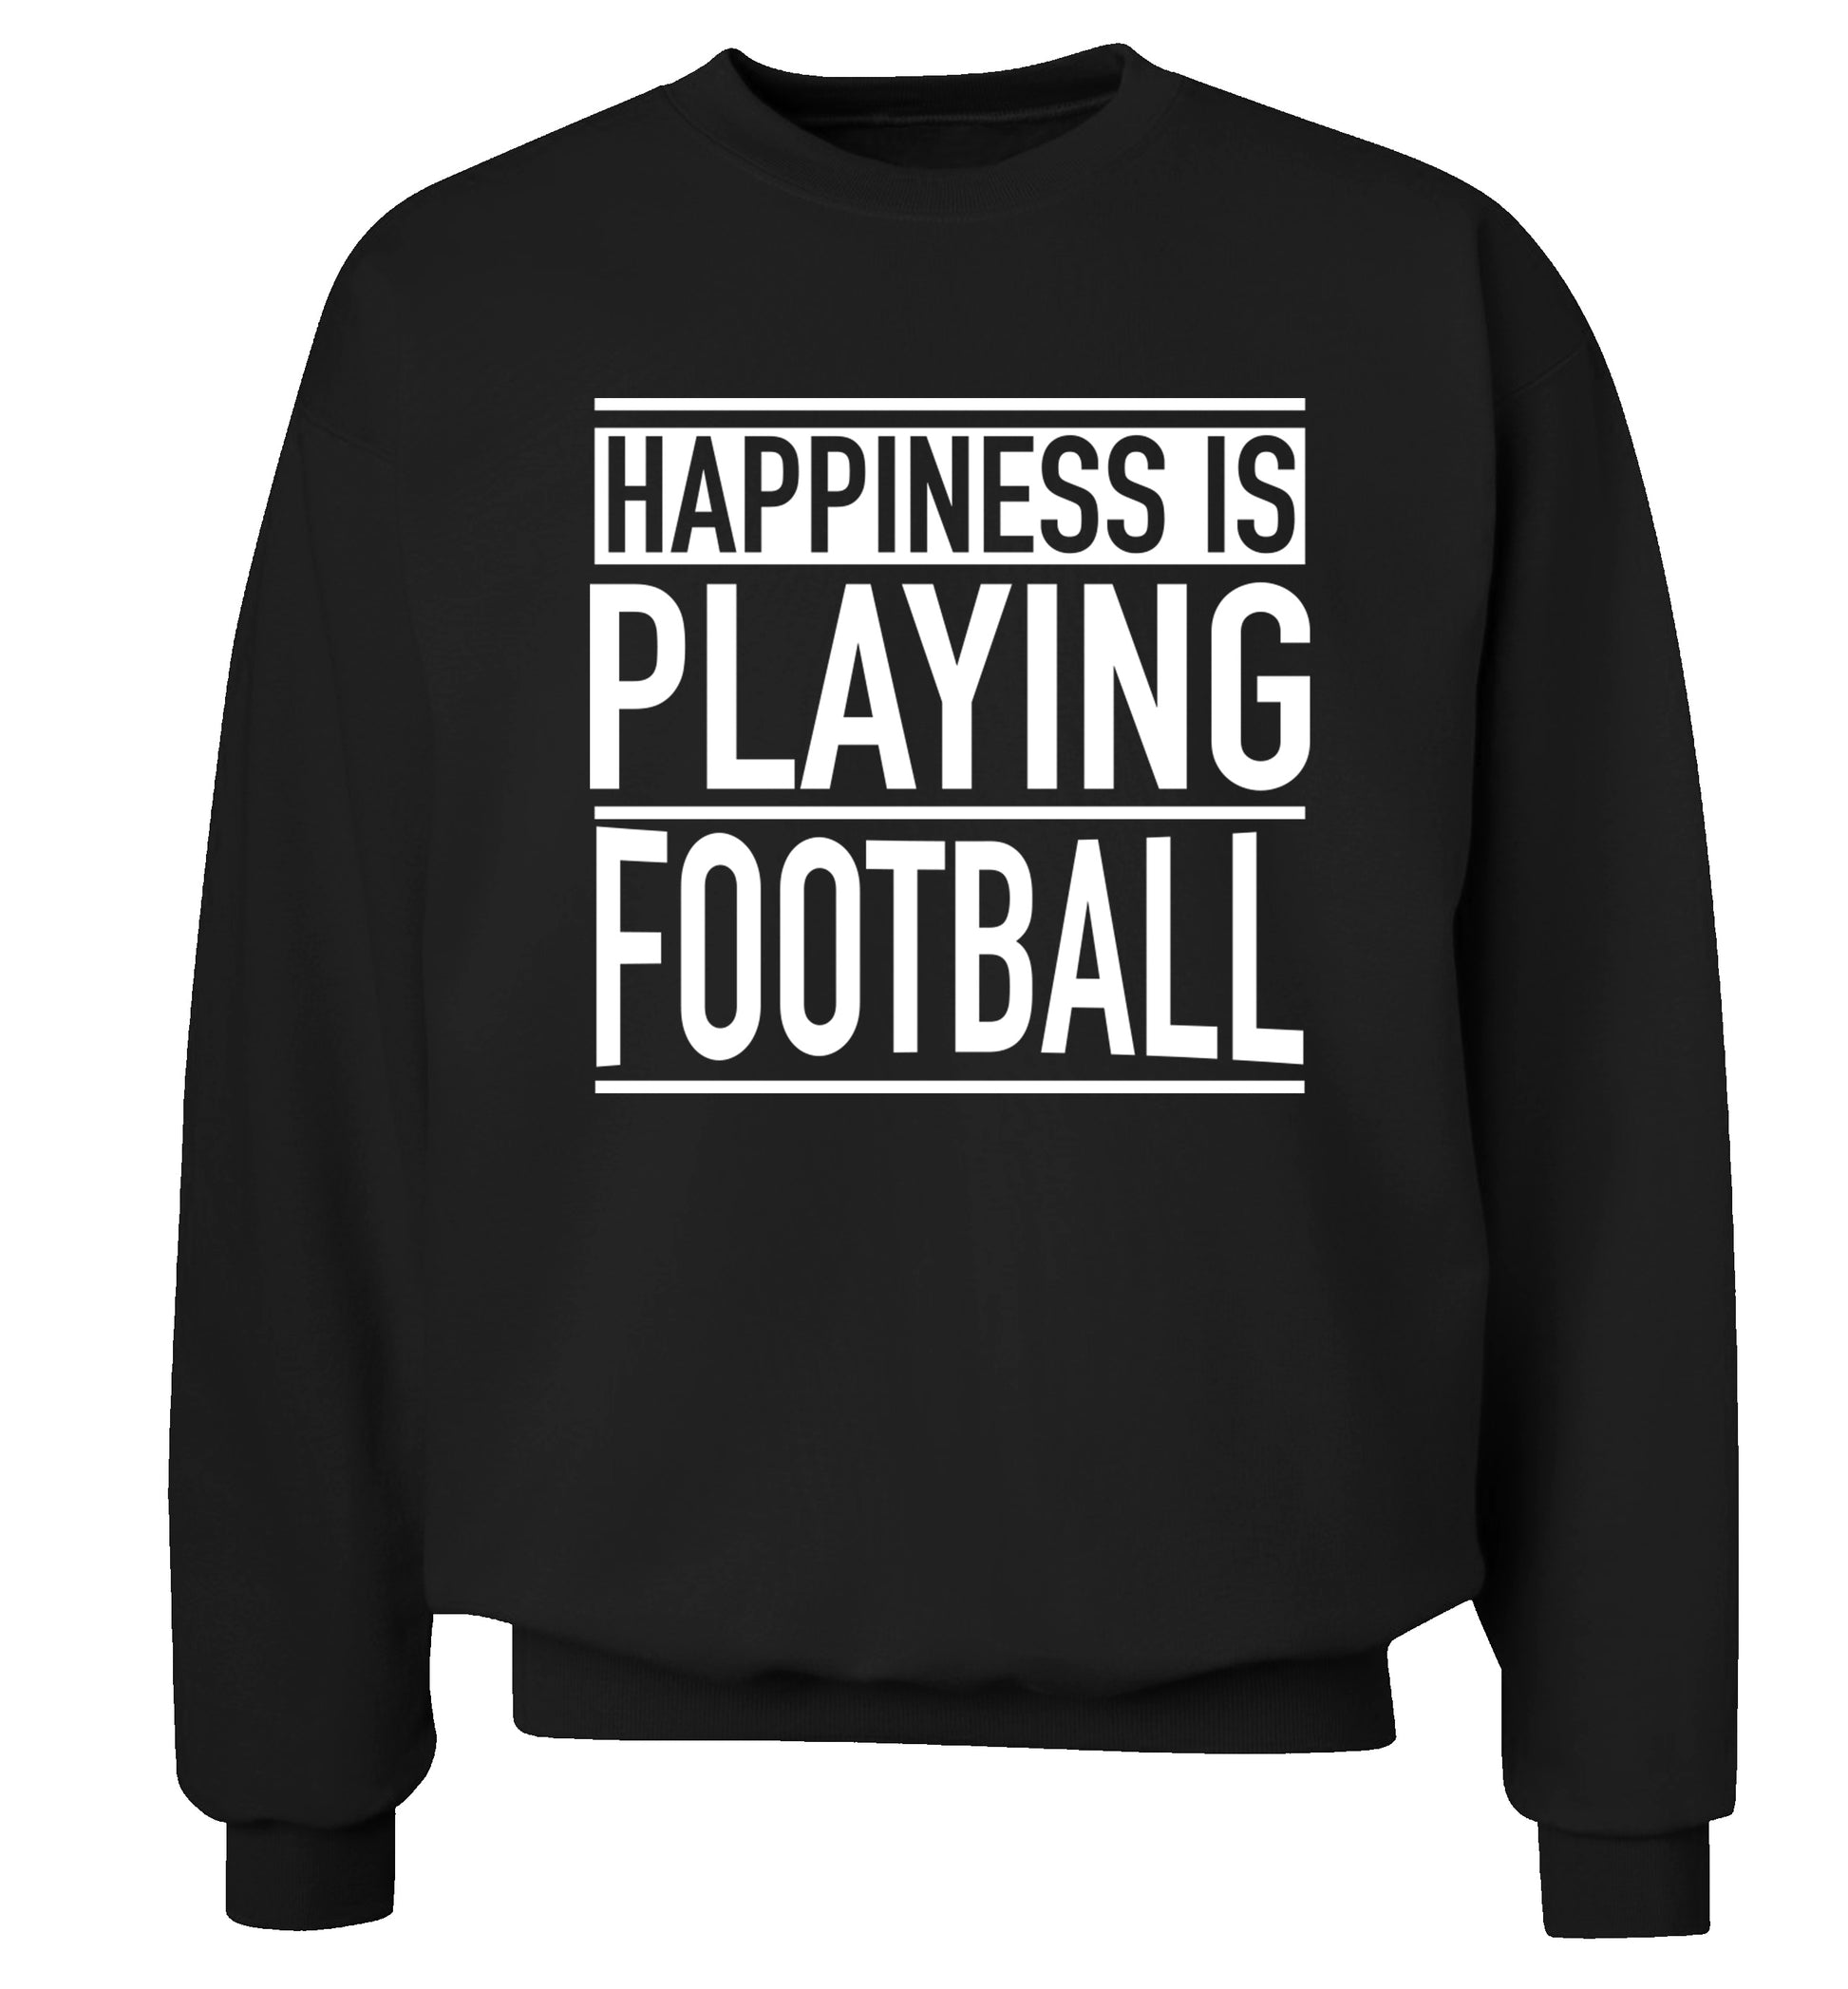 Happiness is playing football Adult's unisexblack Sweater 2XL